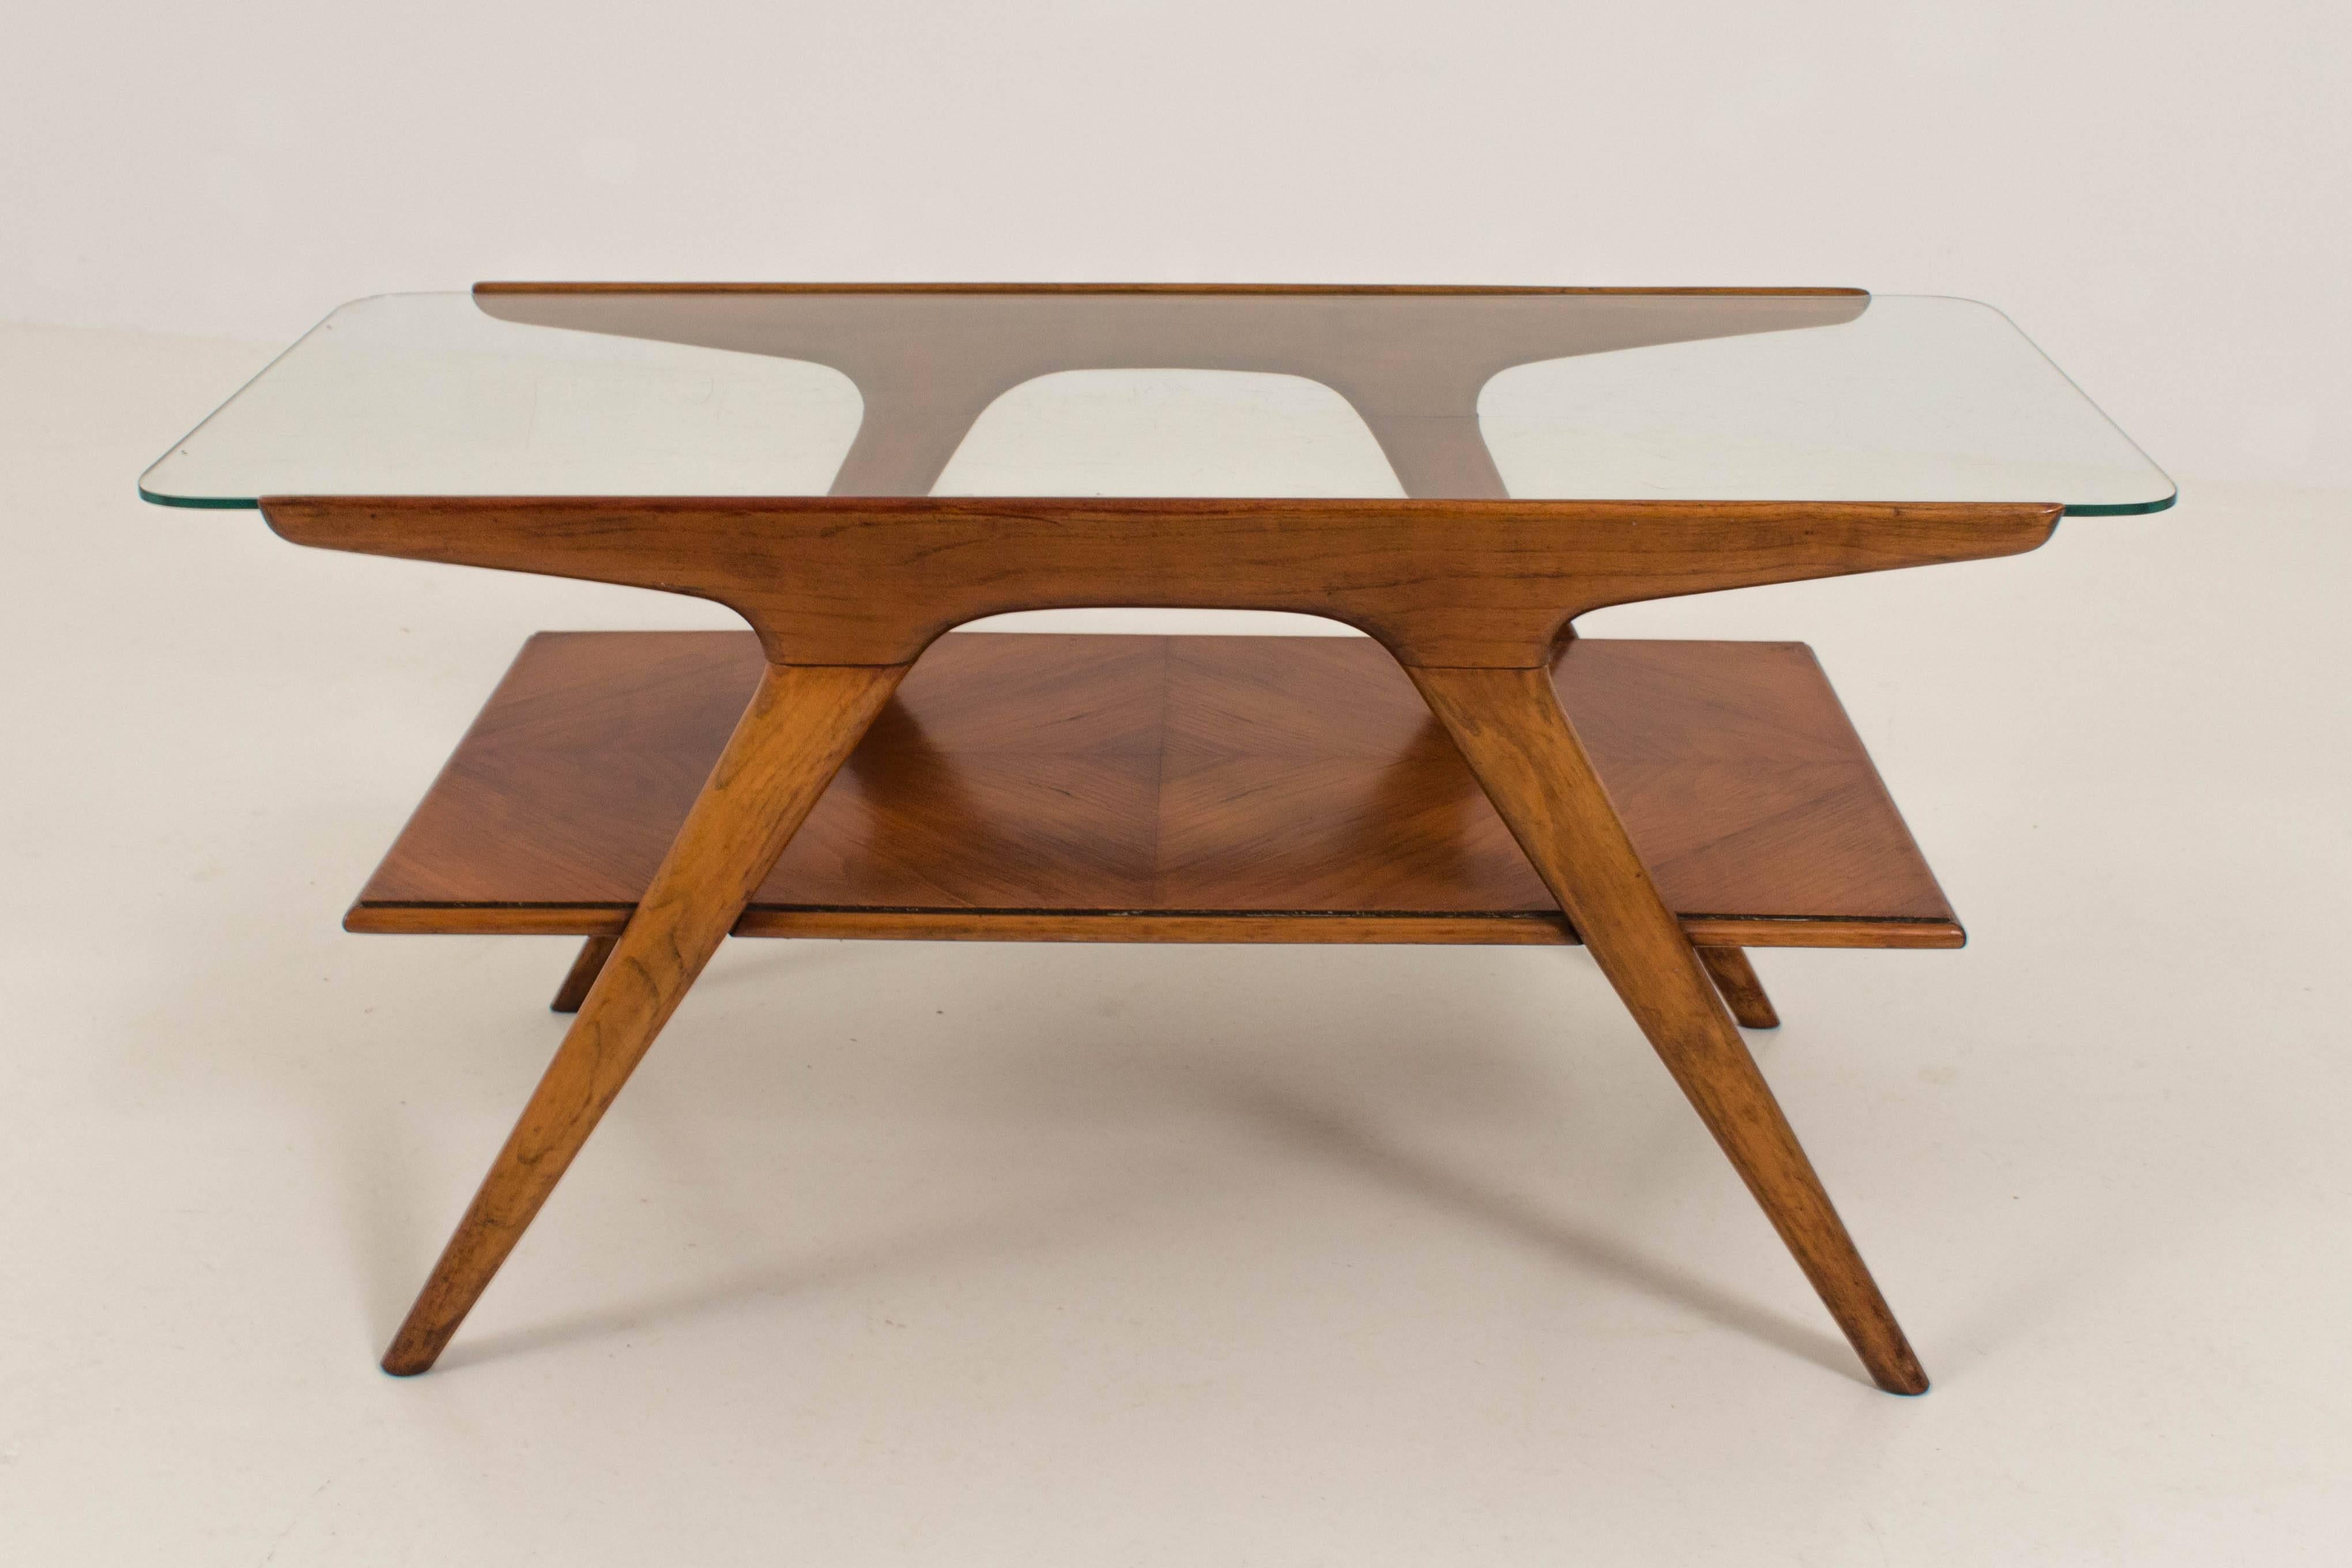 Funky Mid-Century Modern coffee table by Cesare Lacca for Cassina.
Walnut frame with original glass top.
In good original condition with minor wear consistent with age and use,
preserving a beautiful patina.